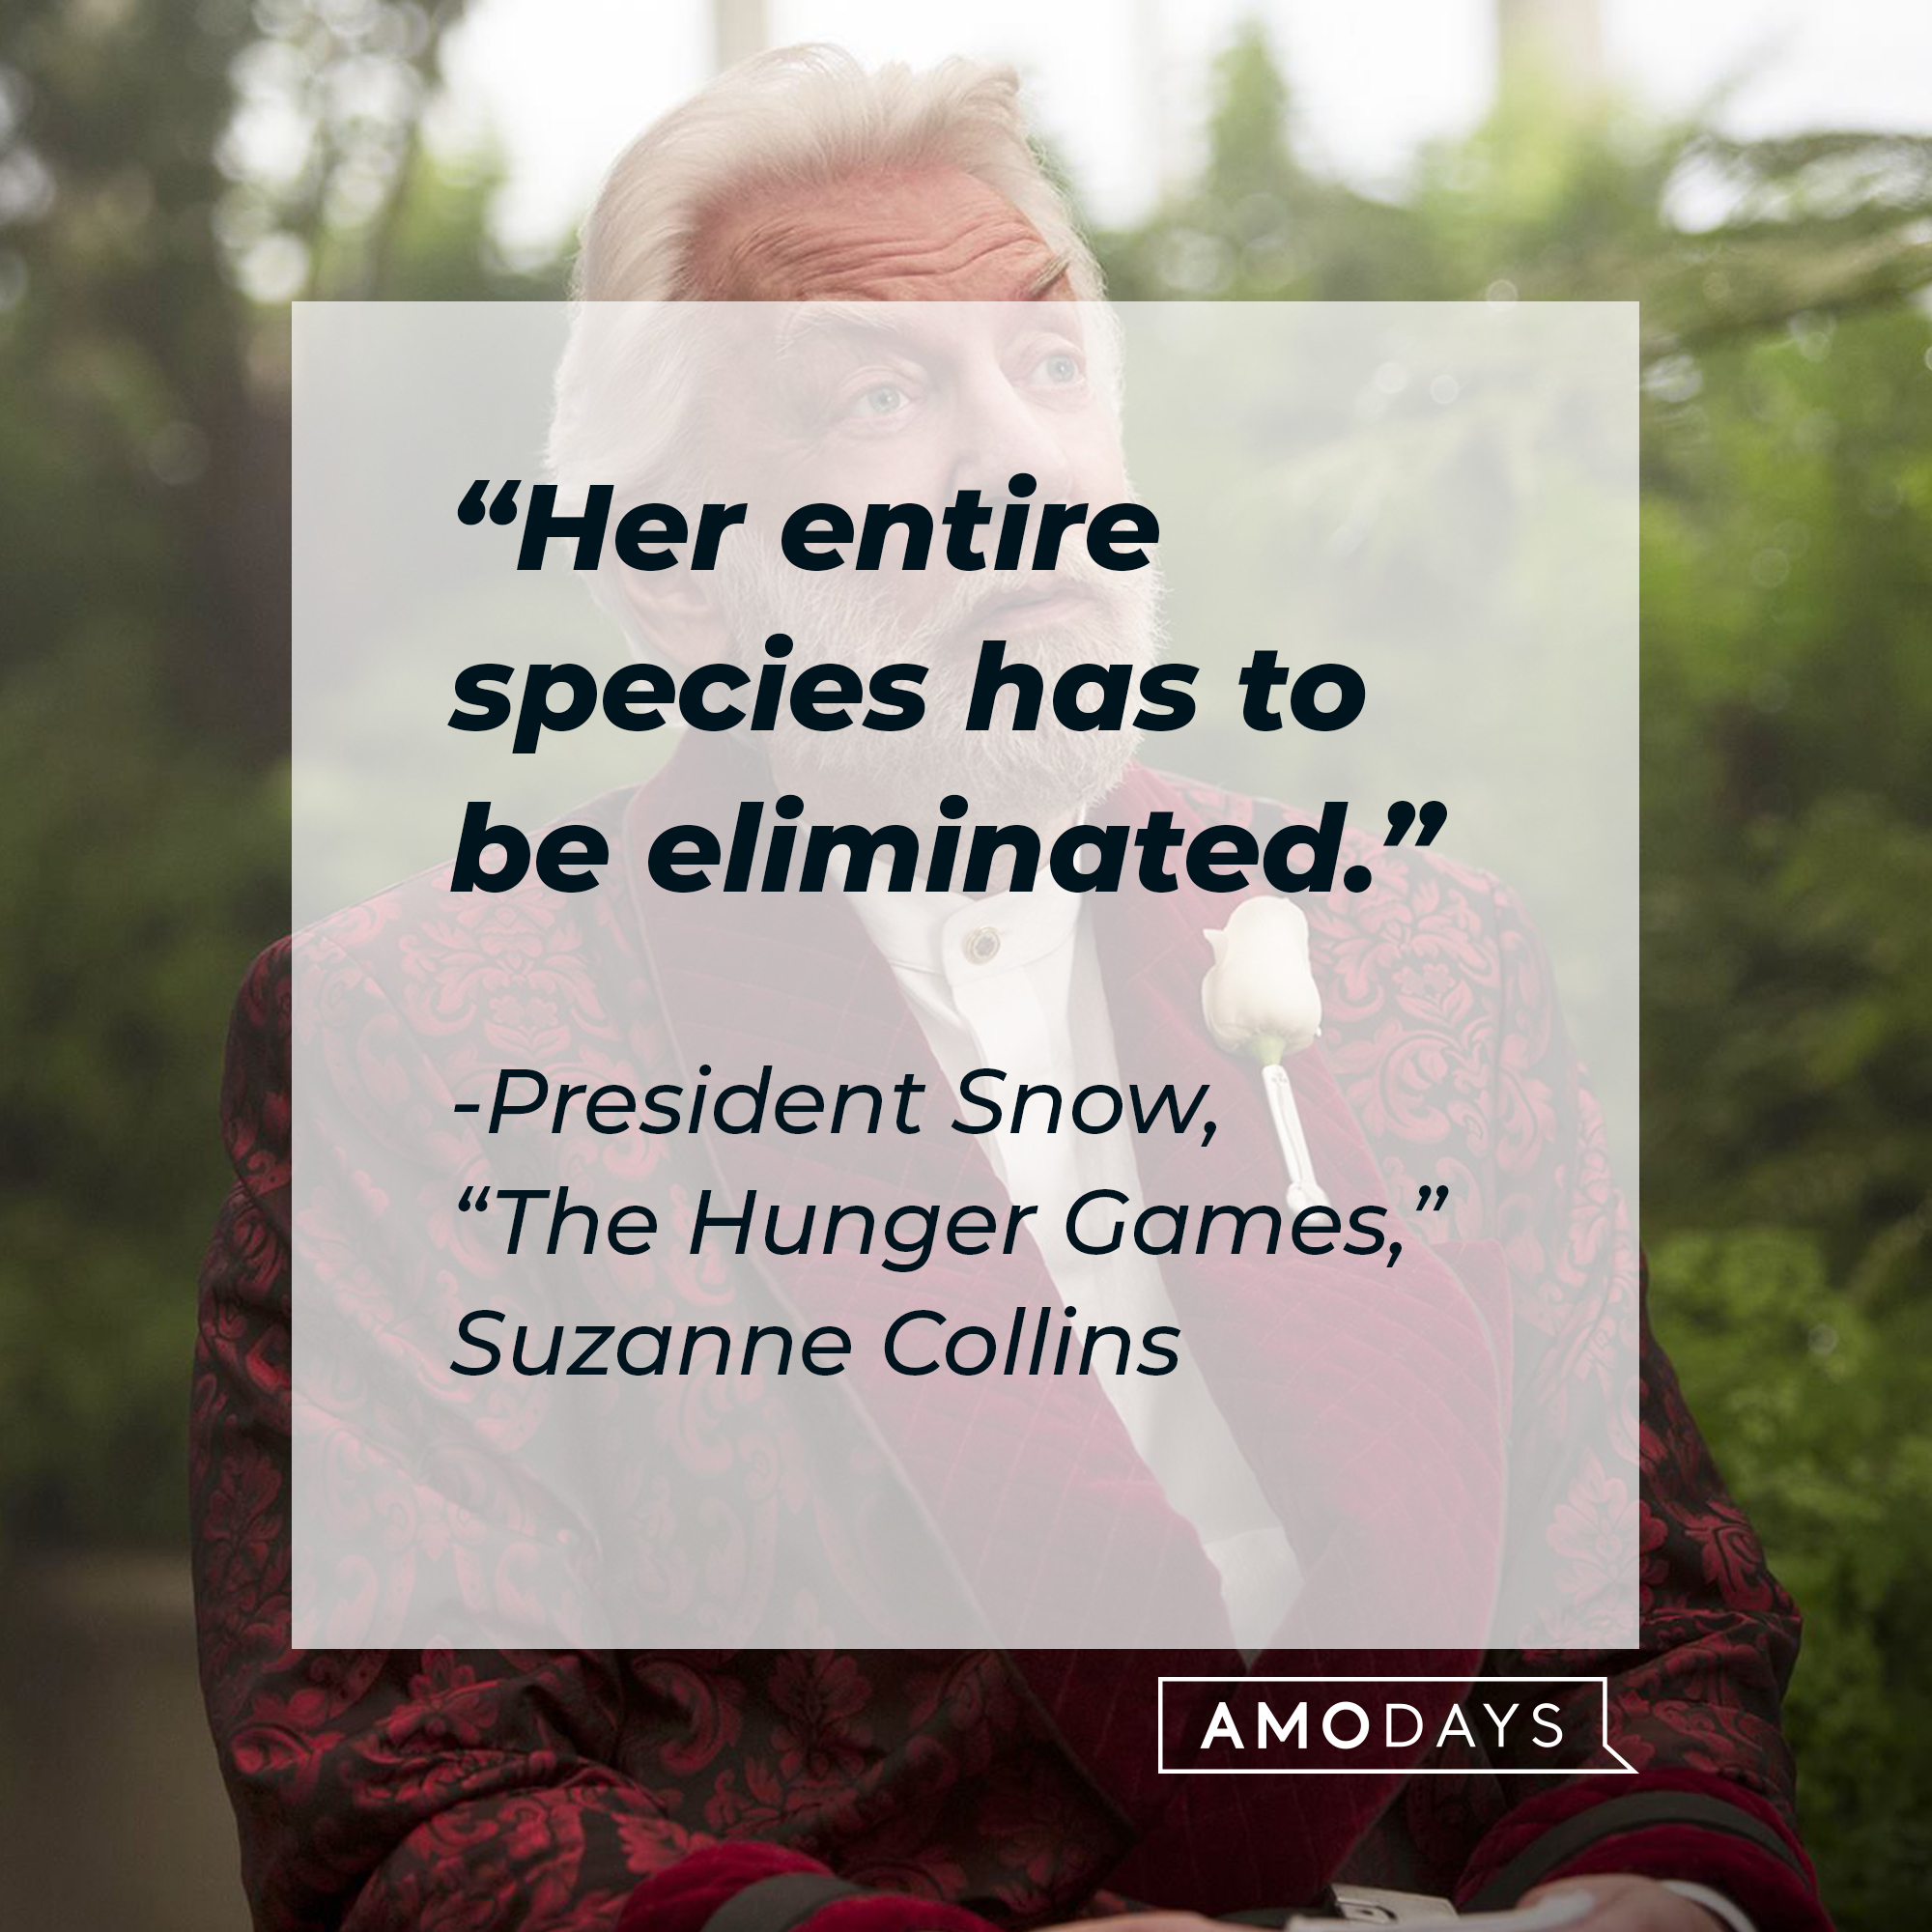 President Snow, with his quote from Suzanne Collins’ “Hunger Games,”: “Her entire species has to be eliminated.” | Source: facebook.com/TheHungerGamesMovie